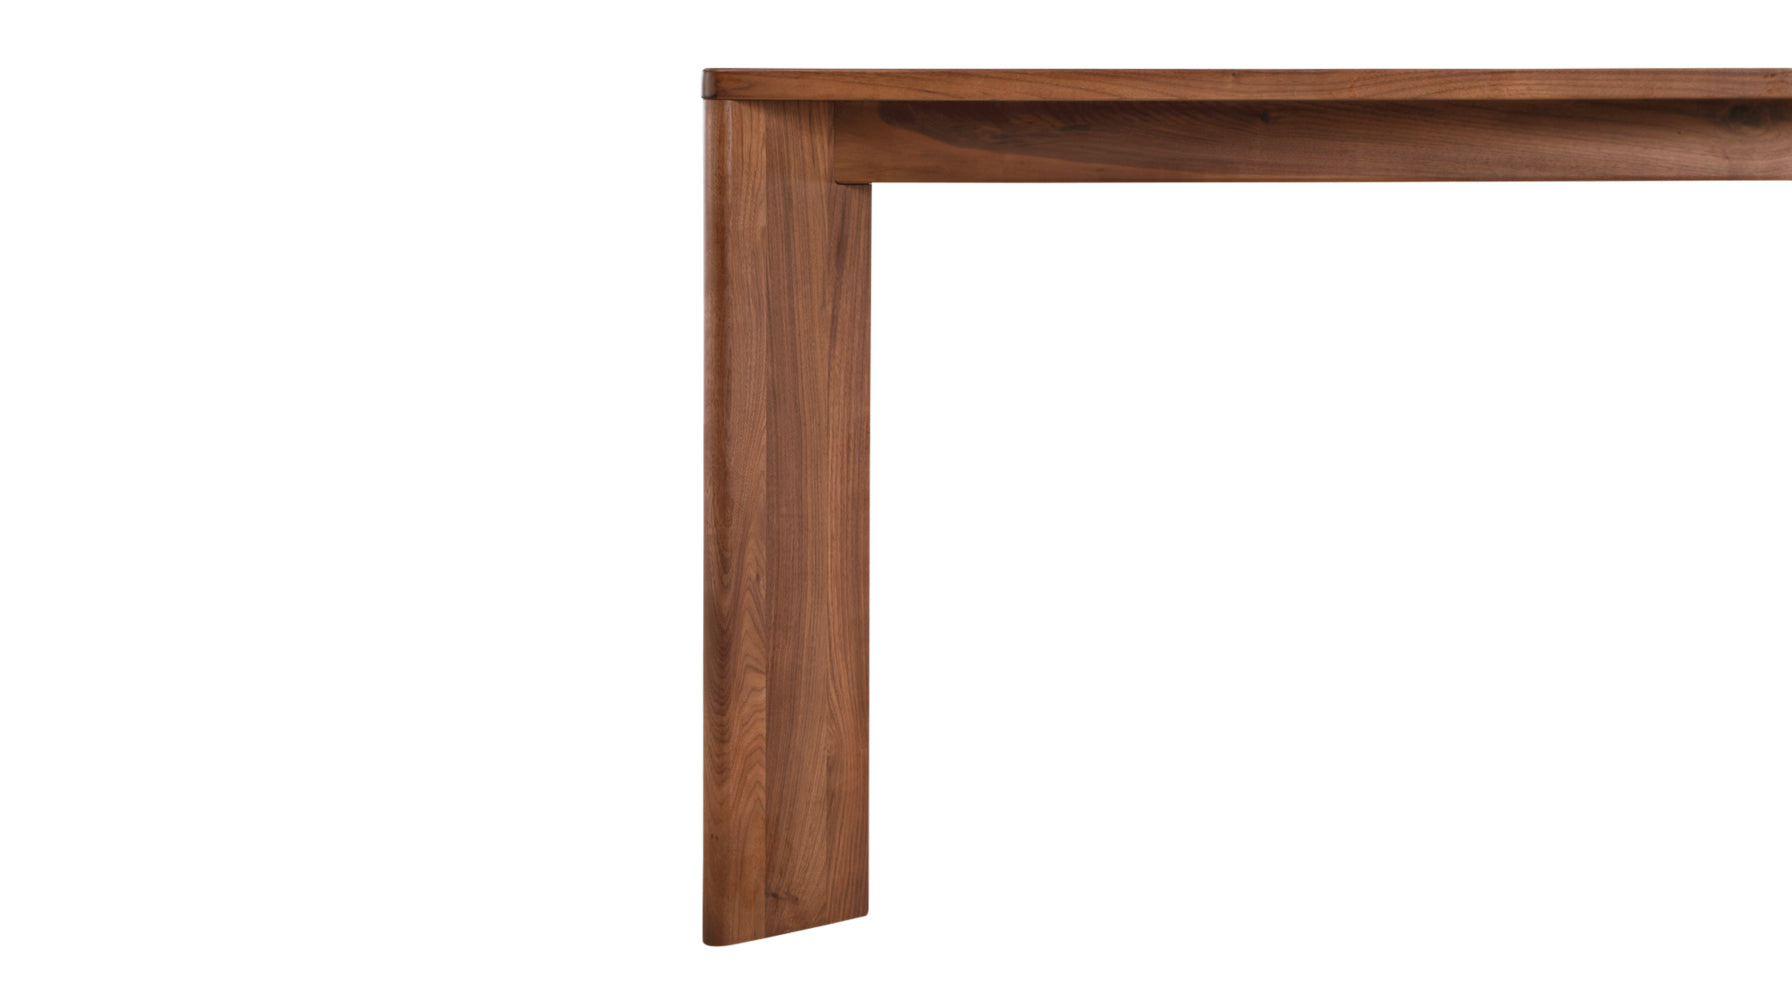 Frame Dining Table, Seats 6-8 People, Walnut - Image 7